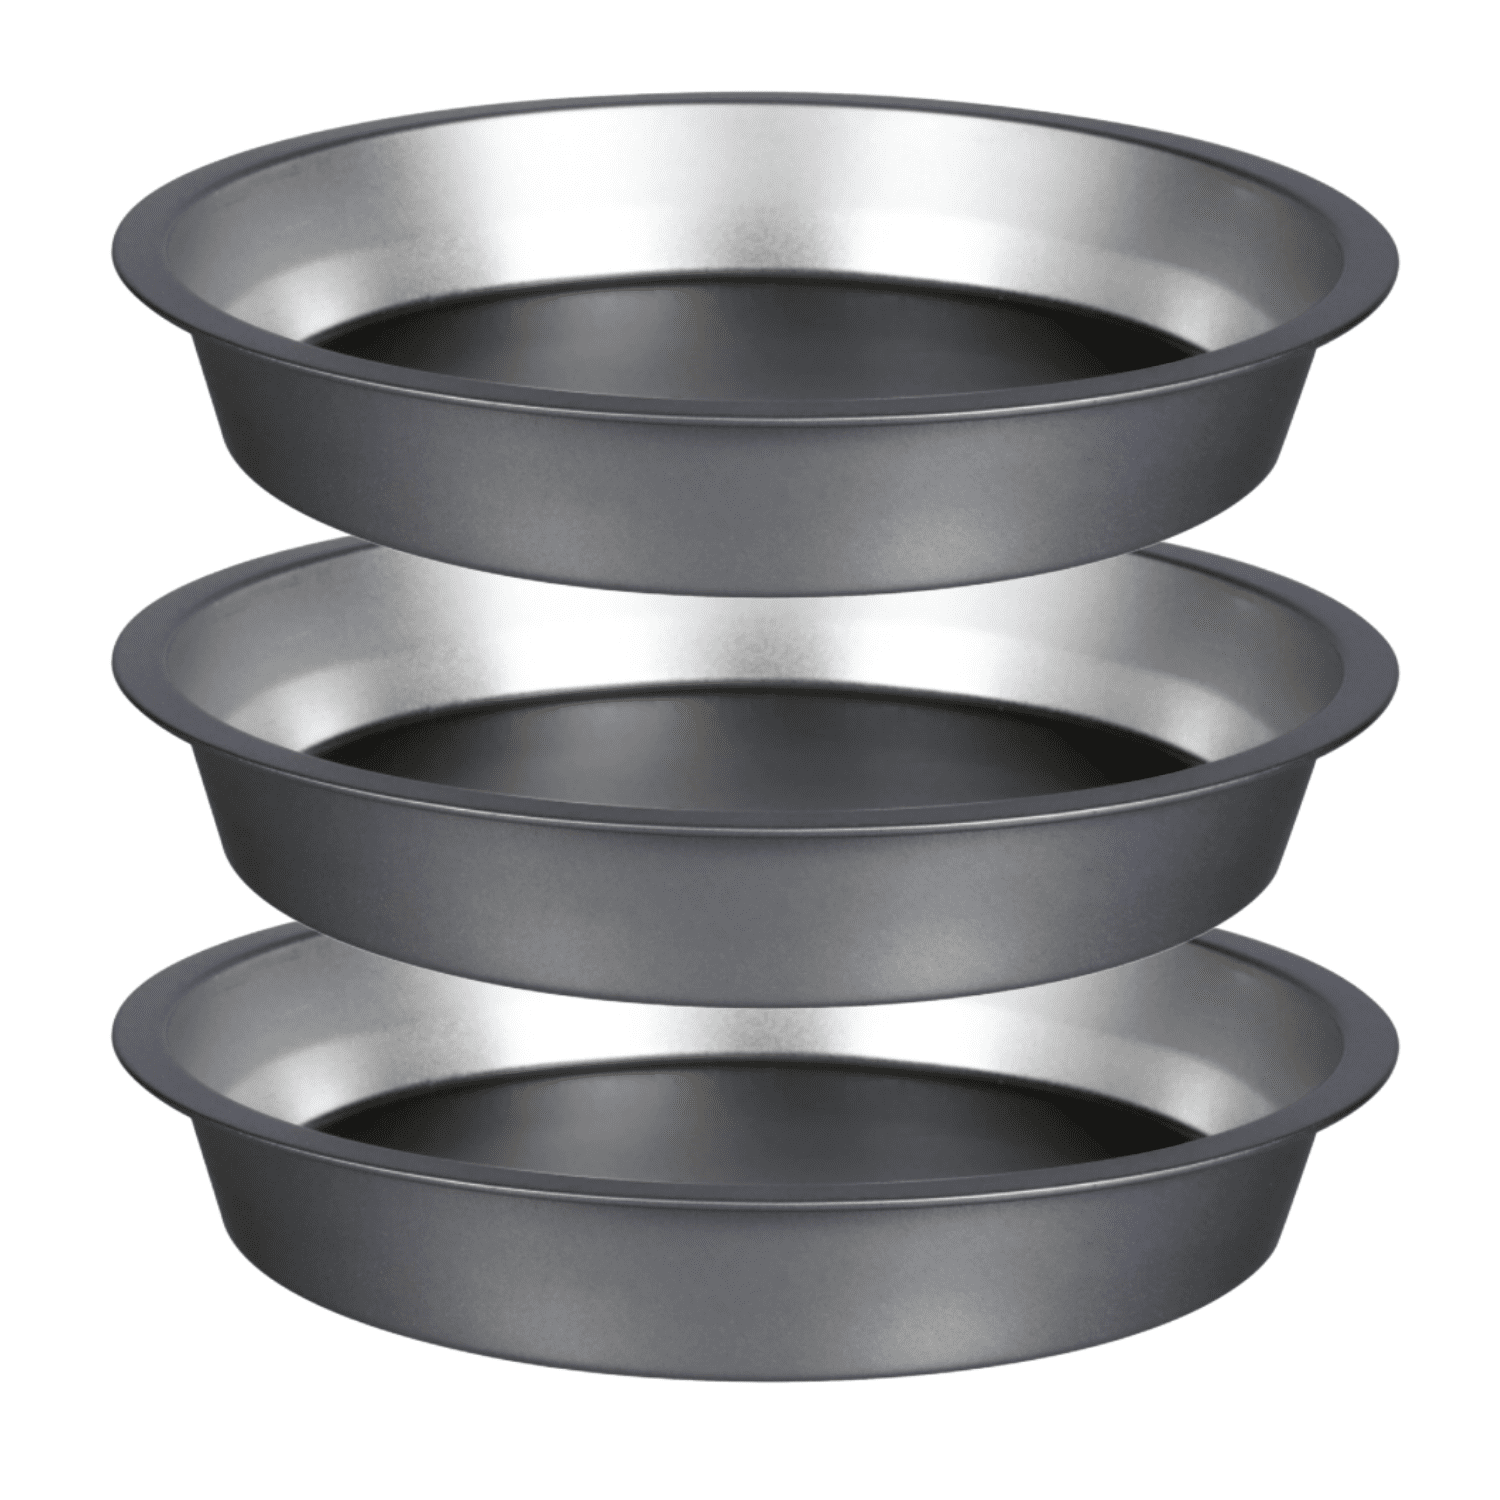 11 Inch Cake Pan Set of 4, P&P CHEF Stainless Steel Large Round Baking  Pans, for Birthday Wedding Thanksgiving, Non Toxic & Healthy, One-piece